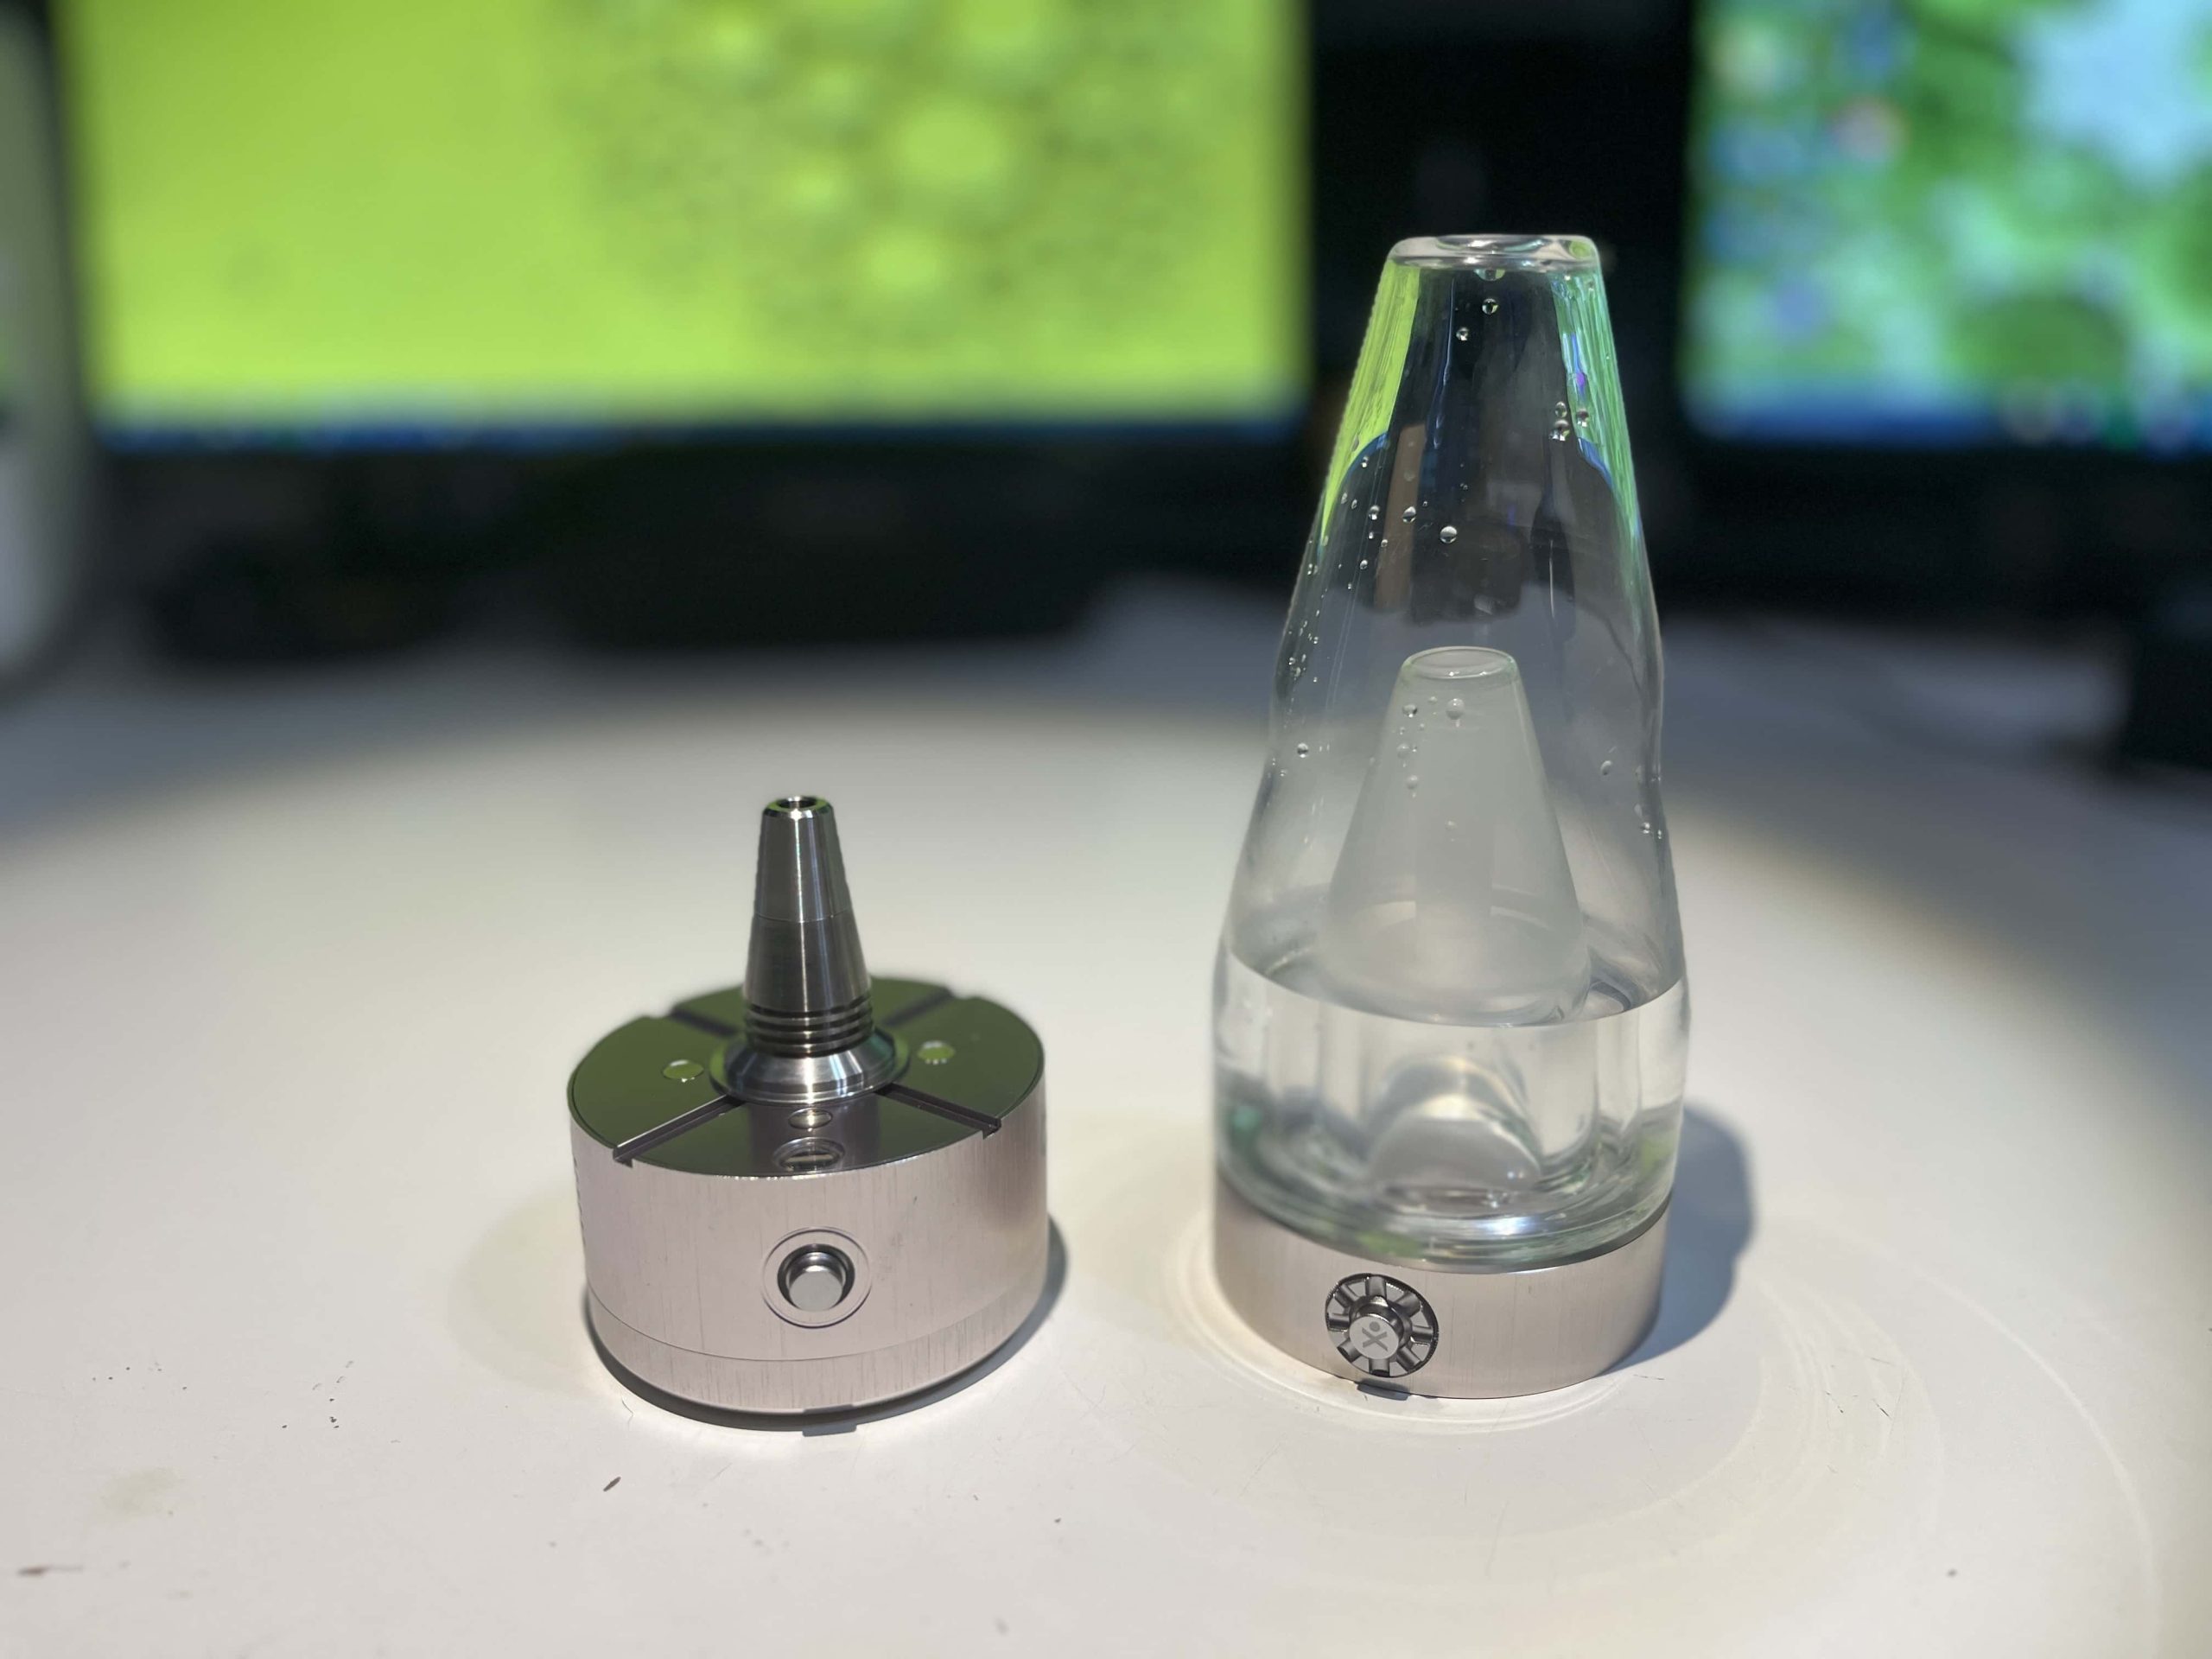 remove the glass to find the atomizer